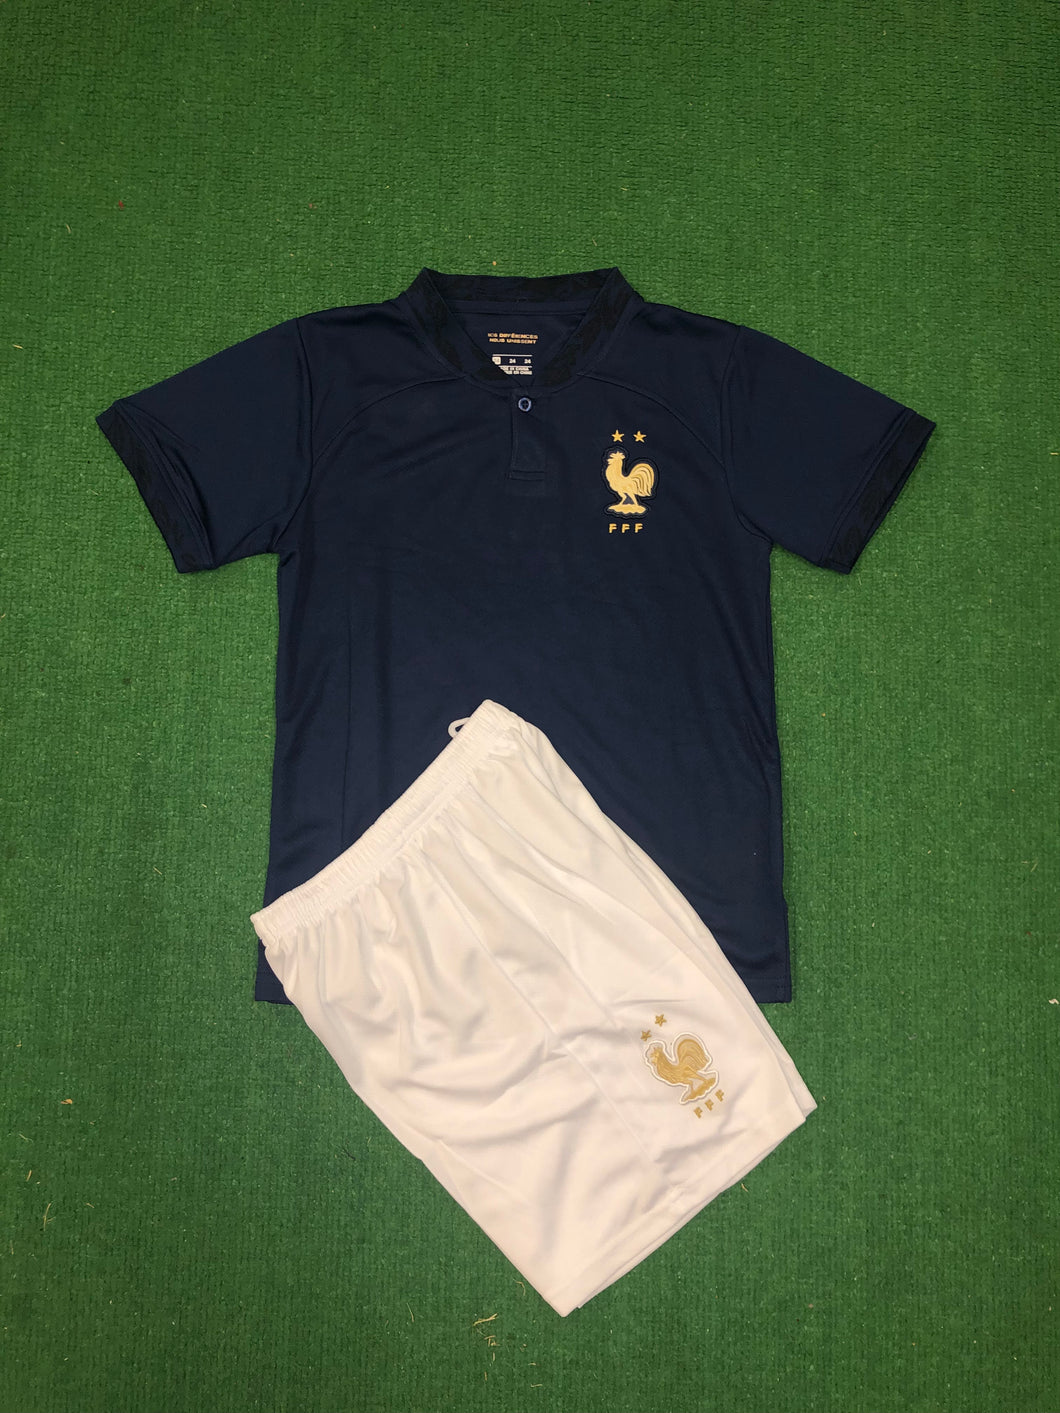 France World Cup Youth Kit